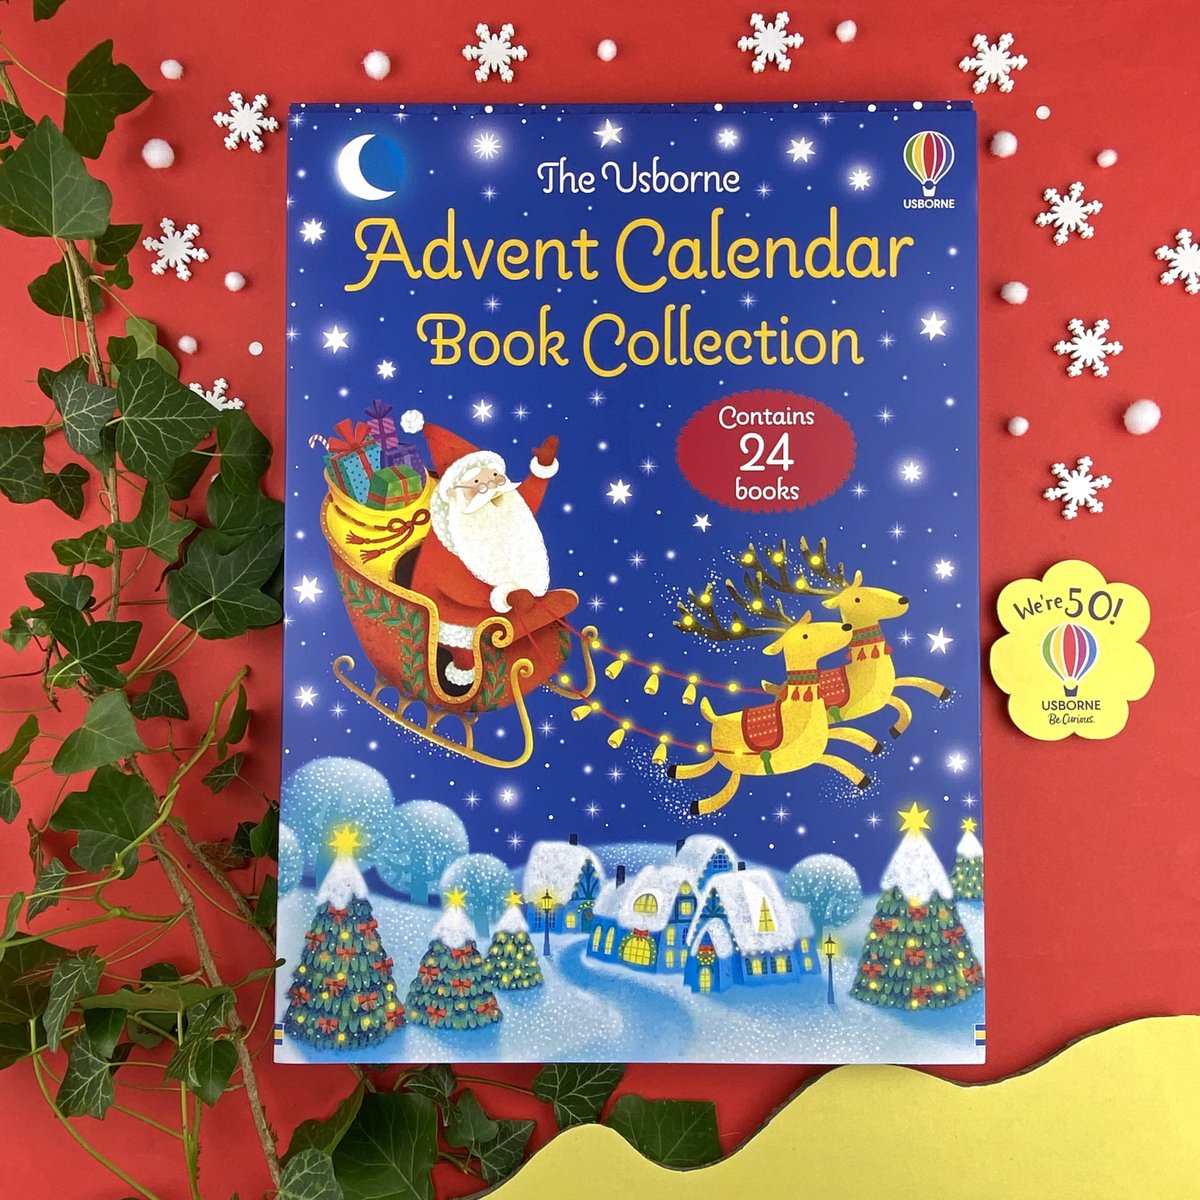 ⭐ GIVEAWAY ⭐ To celebrate the countdown to Christmas, we are giving away an Usborne Advent Calendar! To enter simply follow our account, retweet and like this post. You have until 22.11.23 at 9am (GMT). The winner will receive a message in their DMs. T&Cs apply.